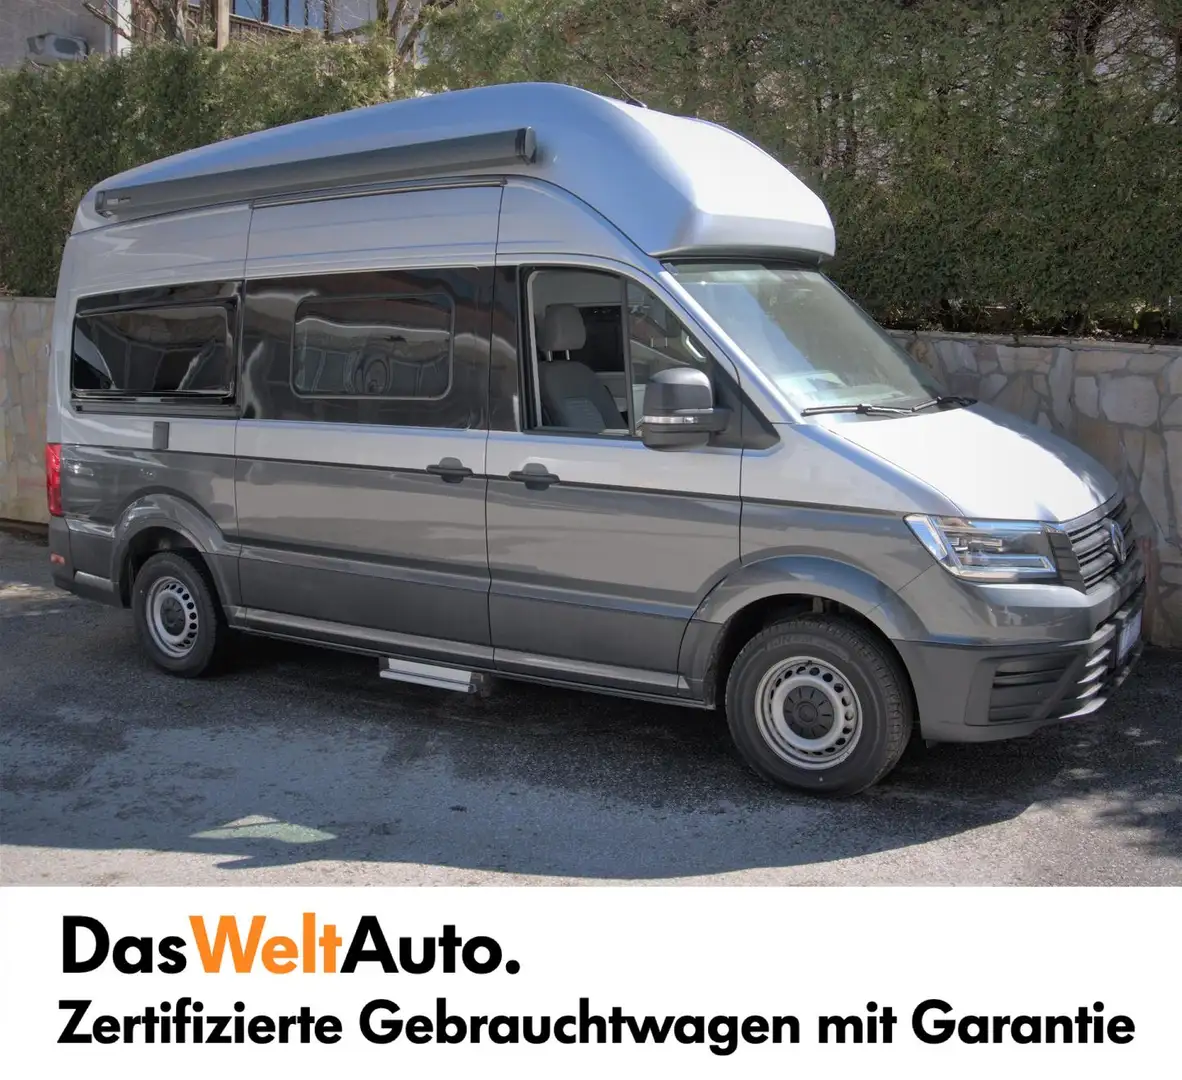 Volkswagen Grand California VW Crafter Grand T6 California 600 TDI 3,5to Argent - 1